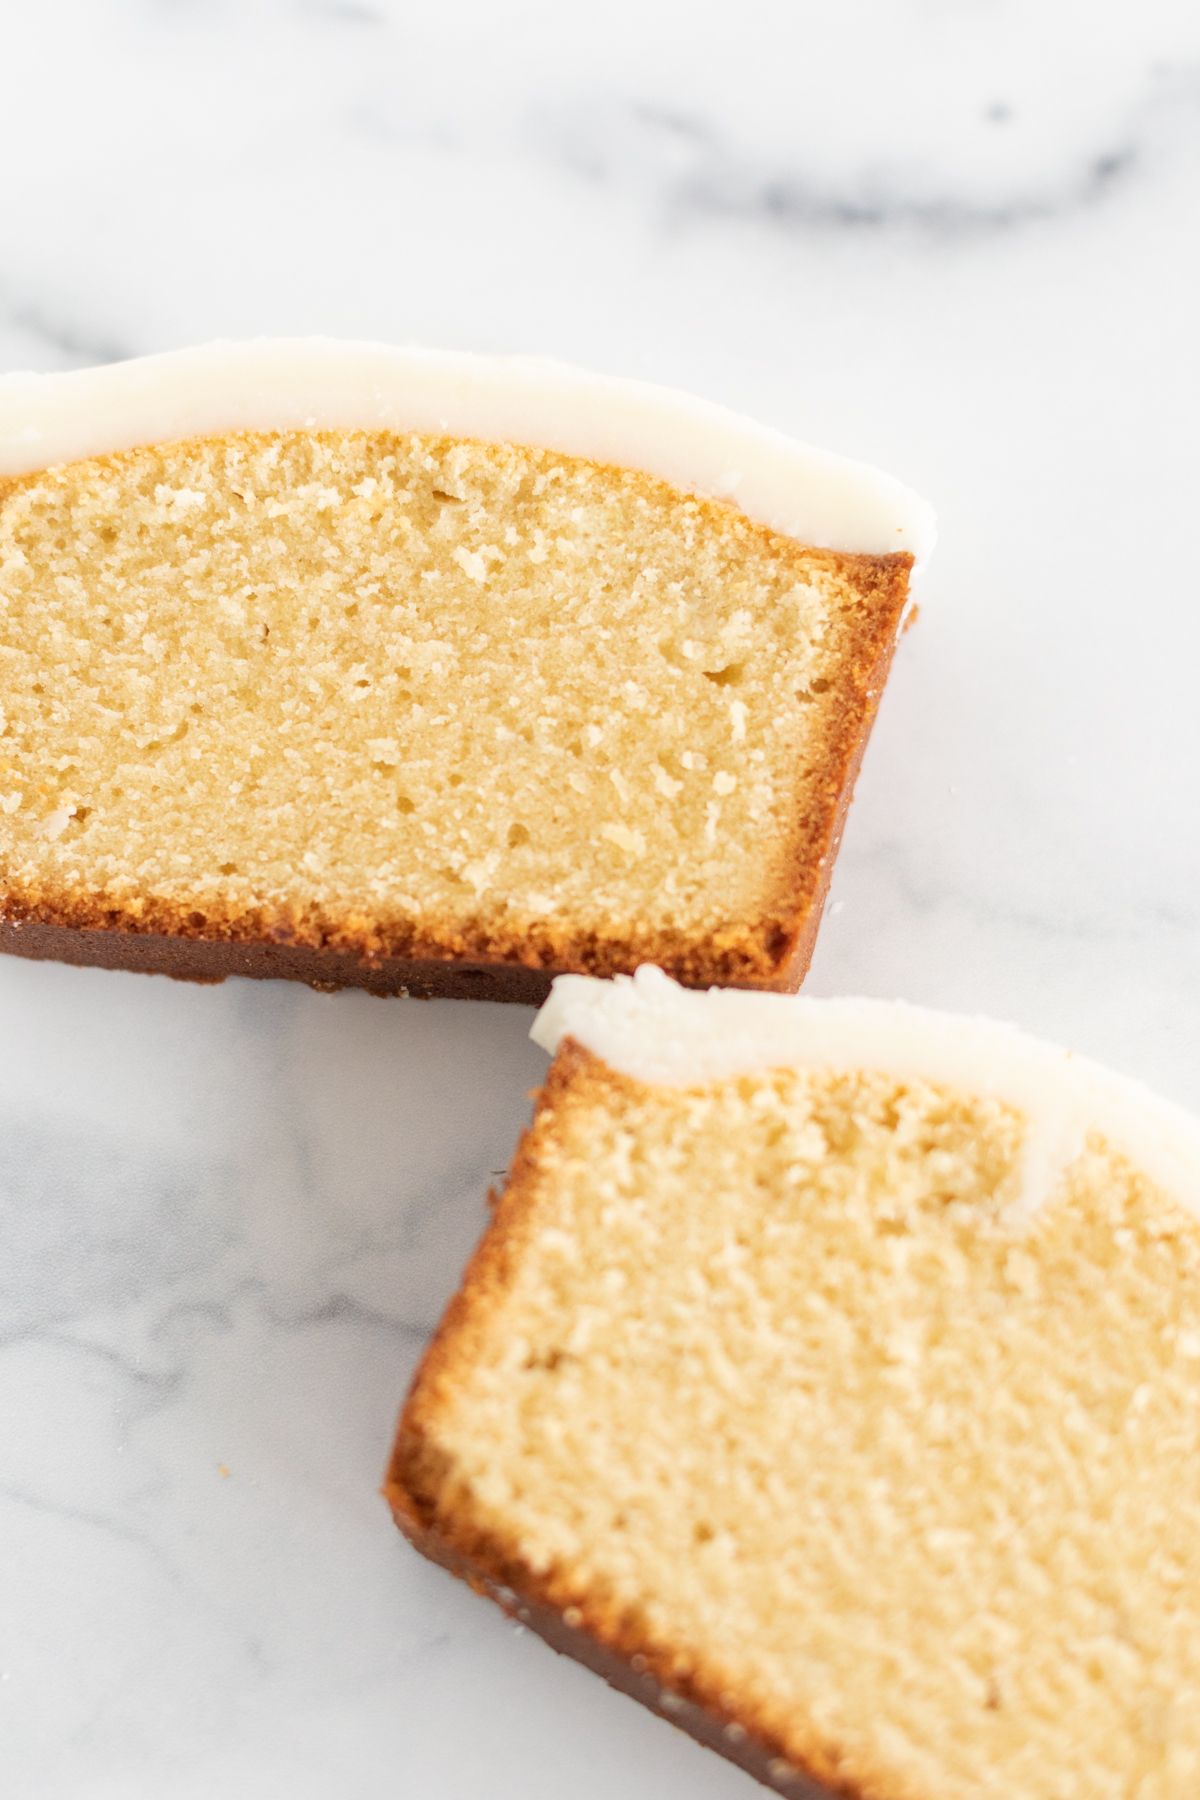 Two slices of an easy pound cake recipe with frosting on top, on a marble countertop.